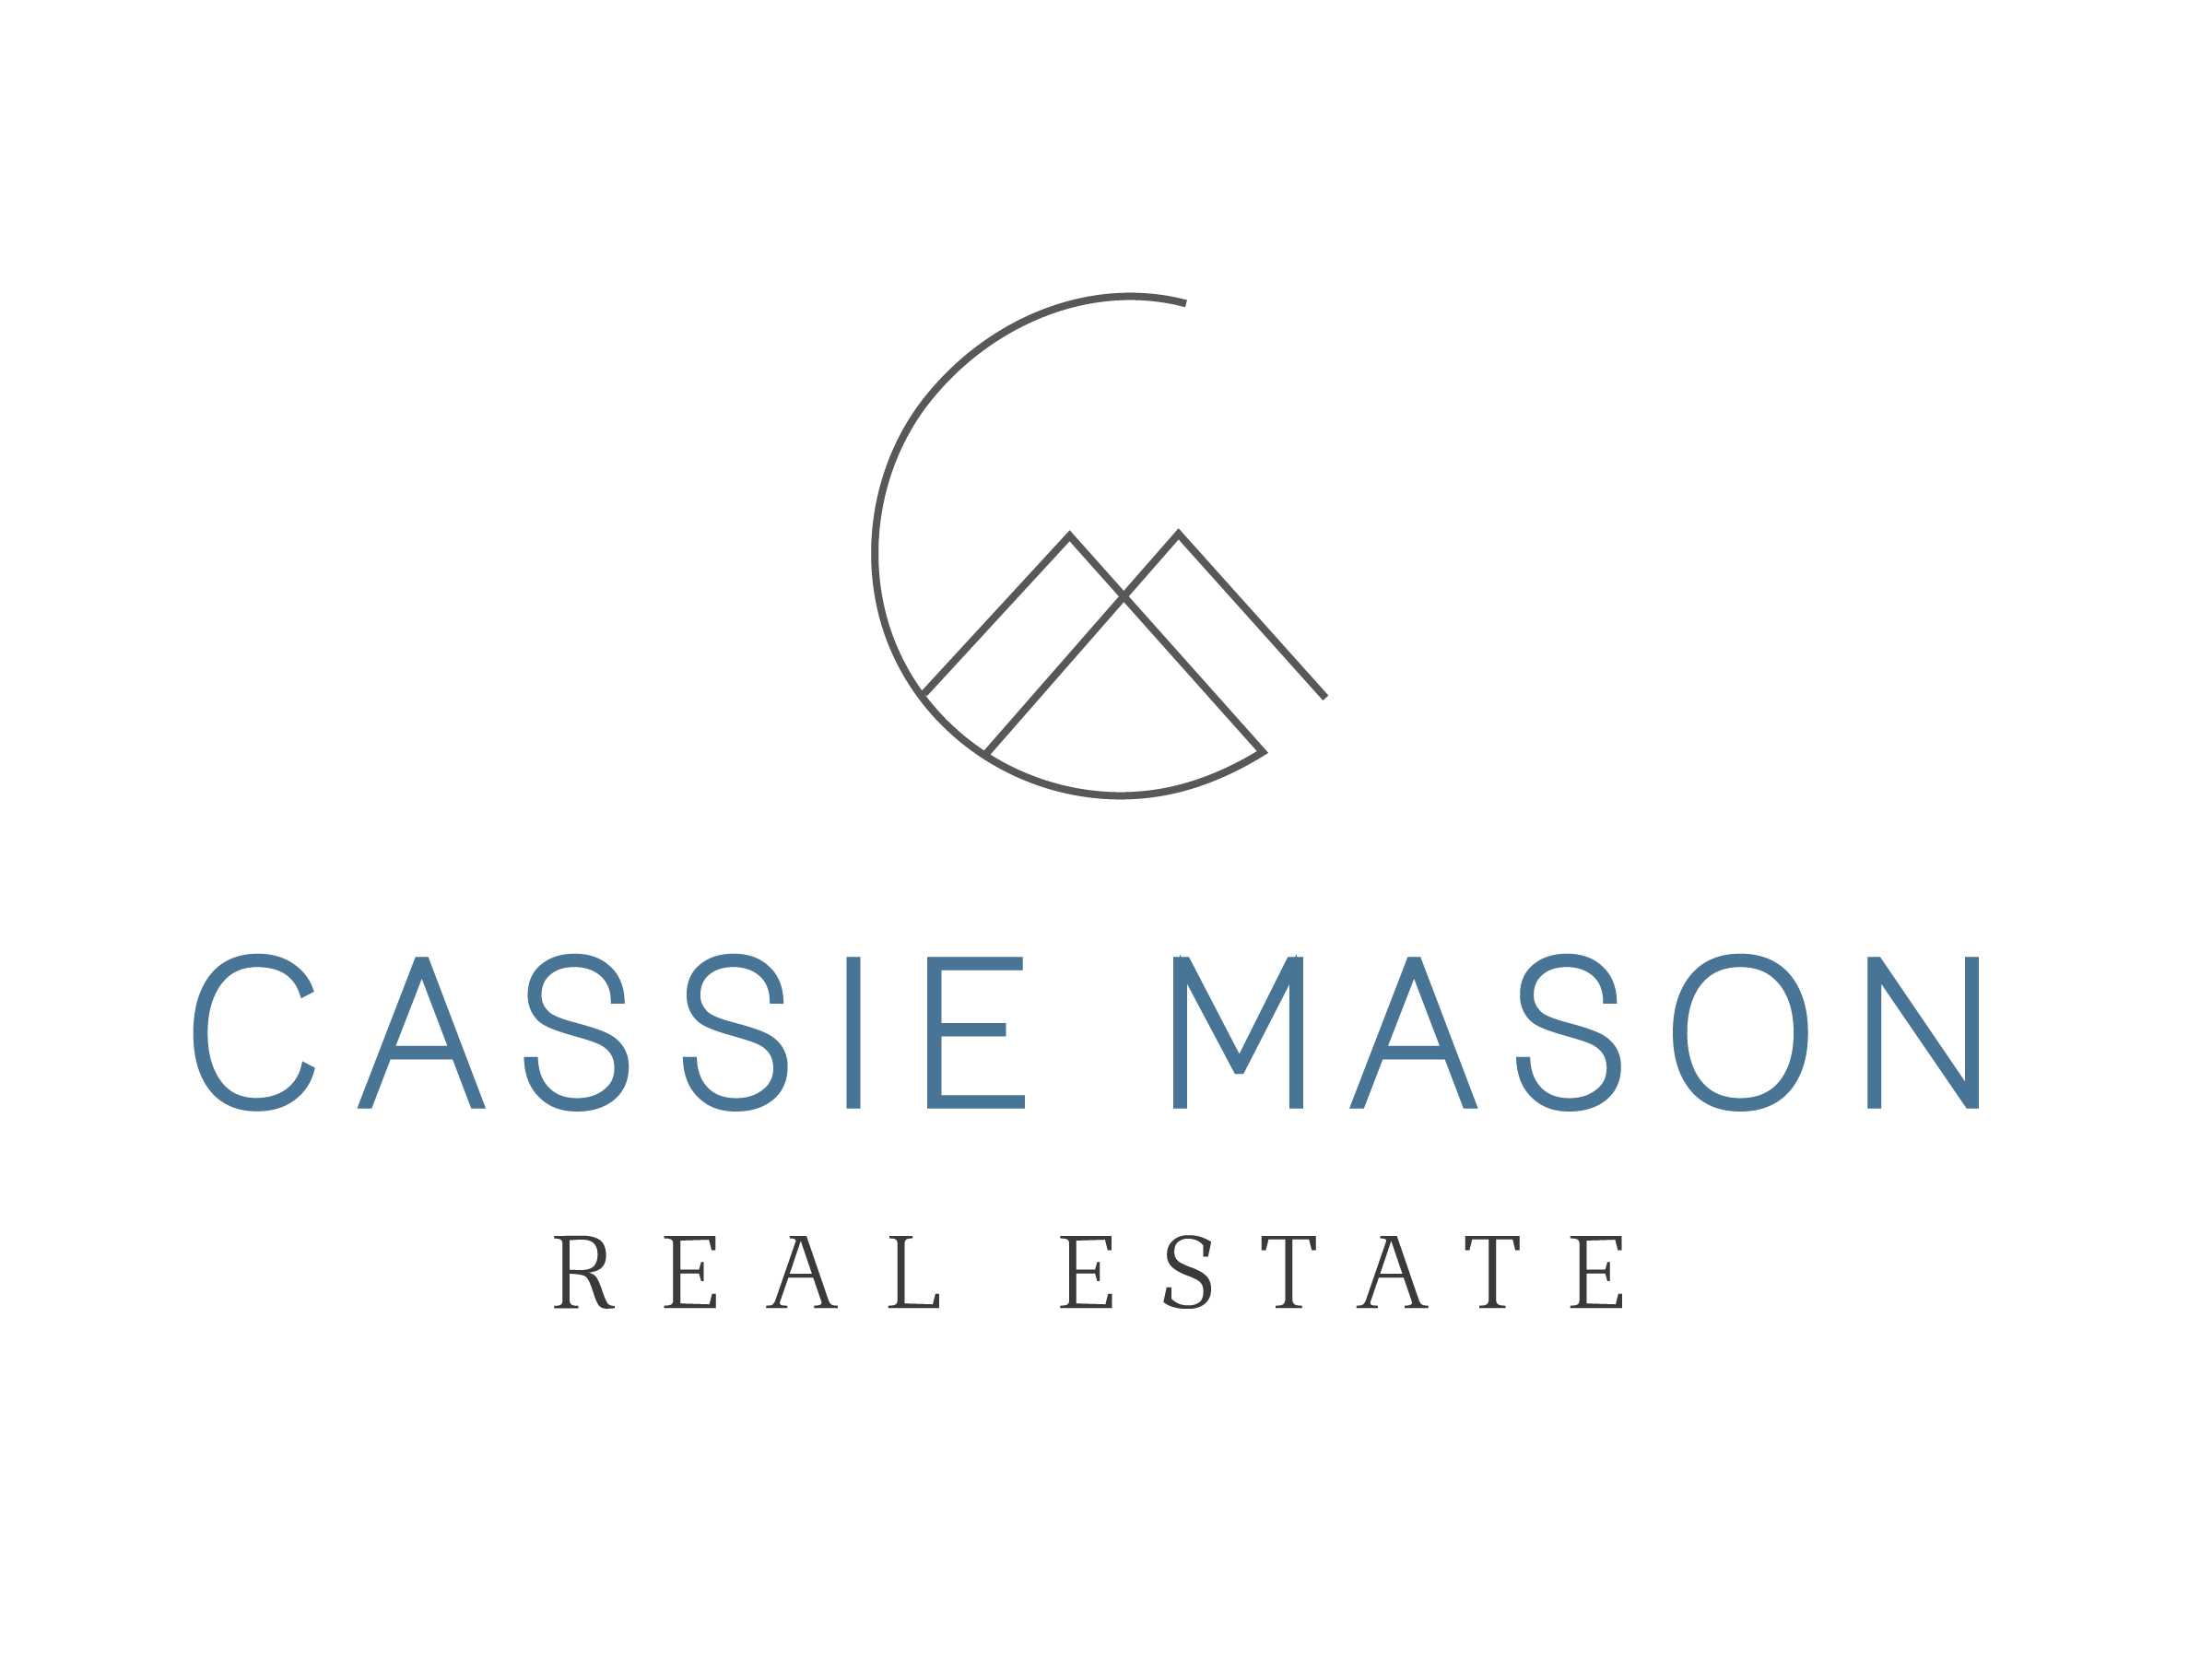 Cassie Mason Real Estate Home Page